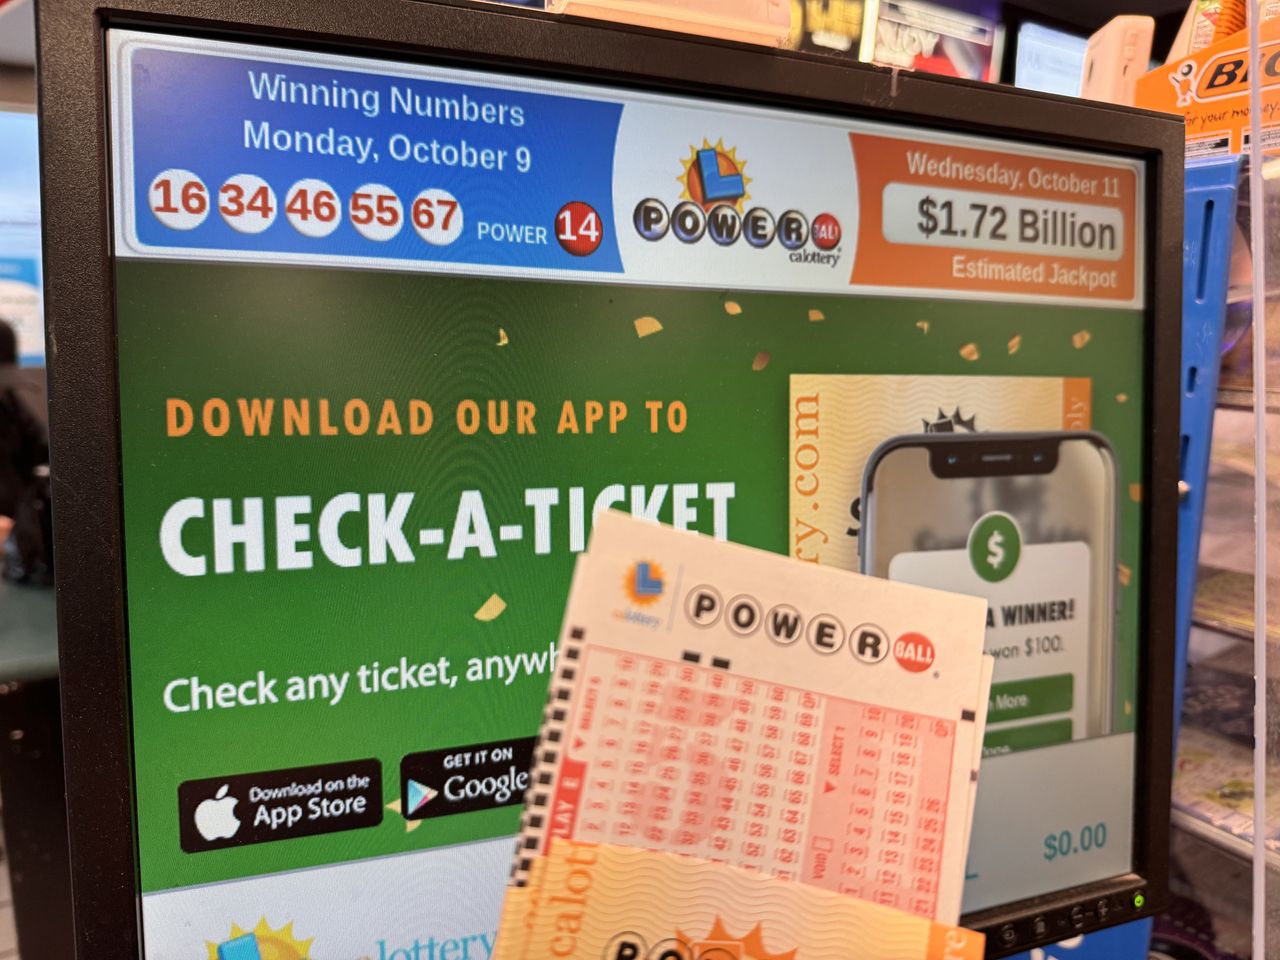 Record jackpot in Powerball. Lucky ticket made the player a multimillionaire